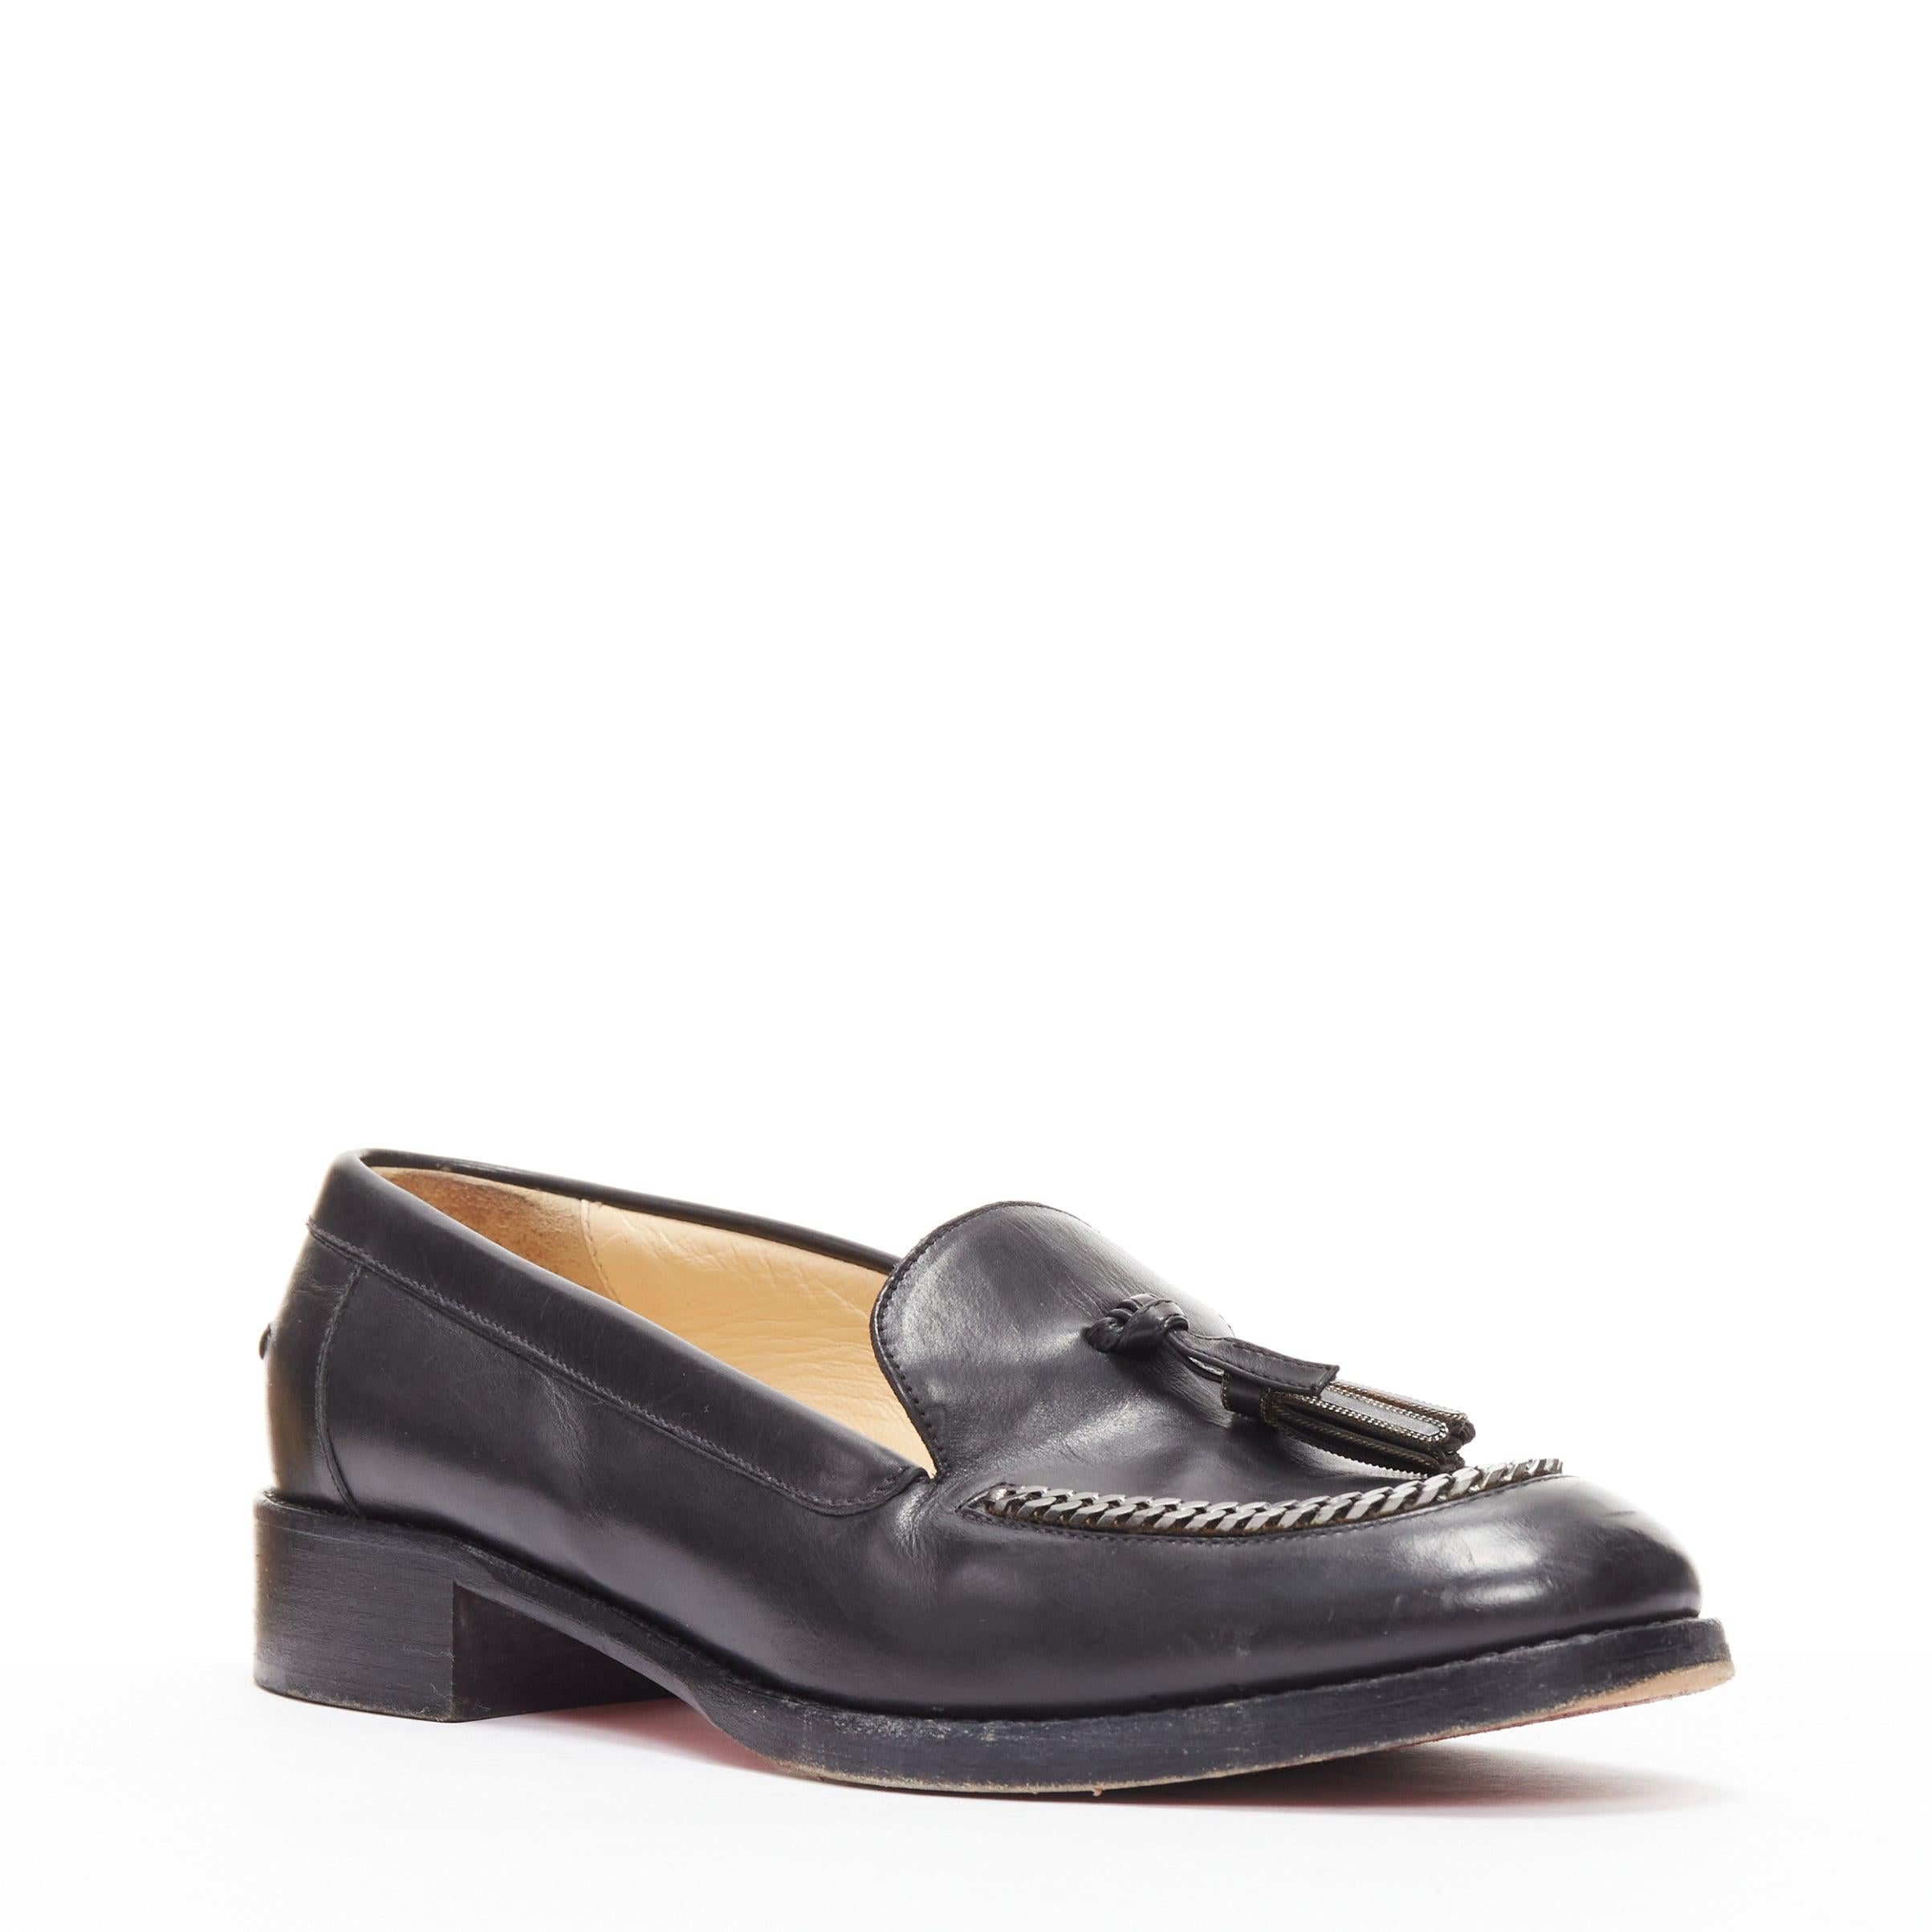 CHRISTIAN LOUBOUTIN Monaliso black leather chain trimmed tassel loafer EU38
Reference: CELG/A00398
Brand: Christian Louboutin
Model: Monaliso
Material: Leather, Wood
Color: Black, Silver
Pattern: Solid
Closure: Slip On
Lining: Brown Leather
Extra